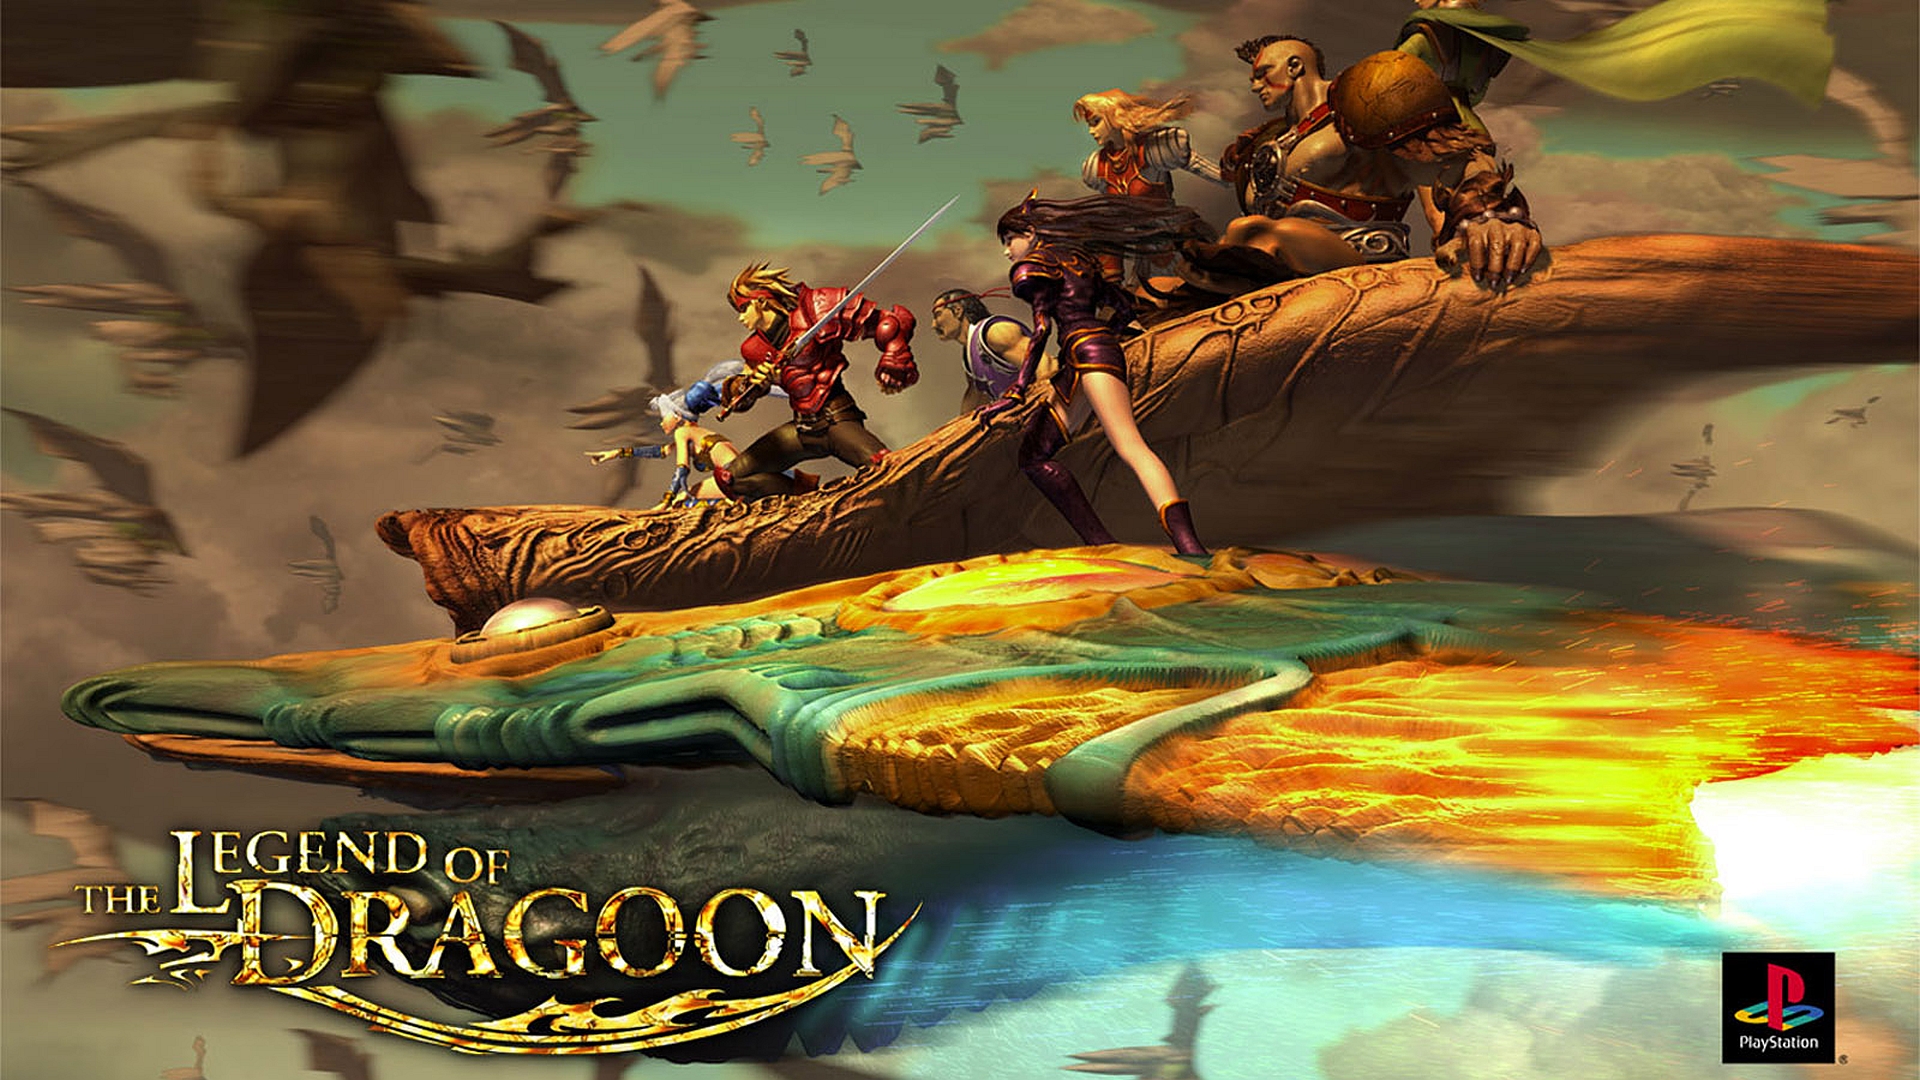 the legend of dragoon, video game